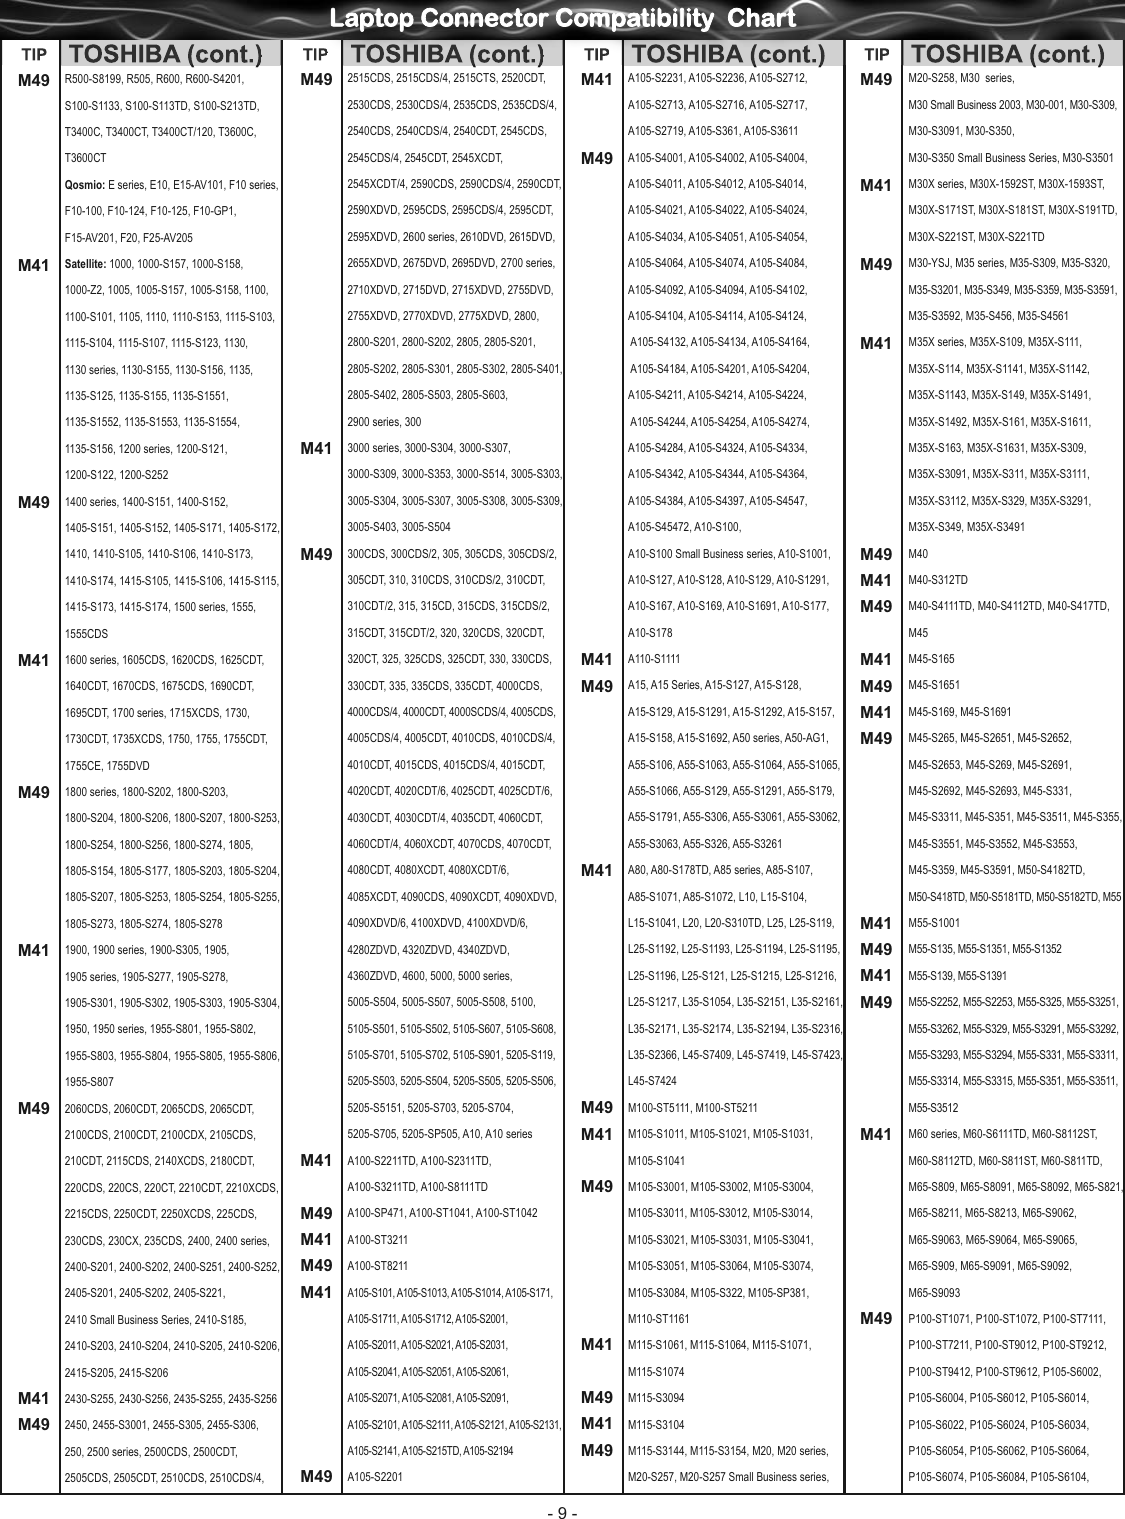 Page 9 of 10 - Rocket-Fish Rocket-Fish-Rf-Bprac2-Users-Manual- AC-5001BB_Connector_Compatibility_Chart_20090403_2  Rocket-fish-rf-bprac2-users-manual